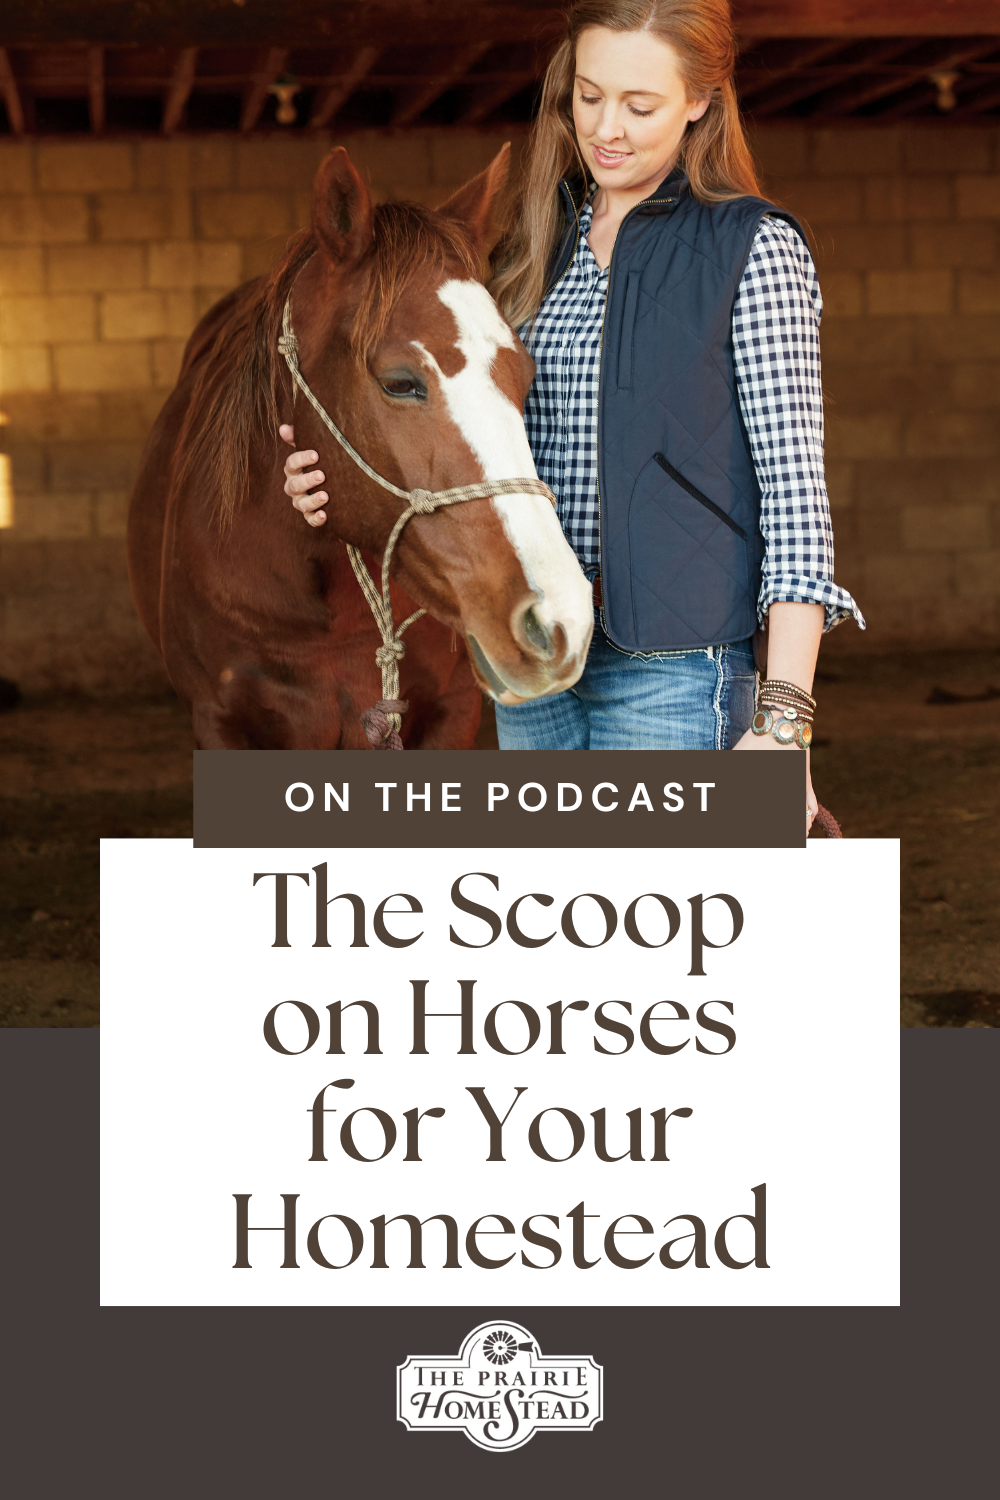 The Scoop on Horses for Your Homestead